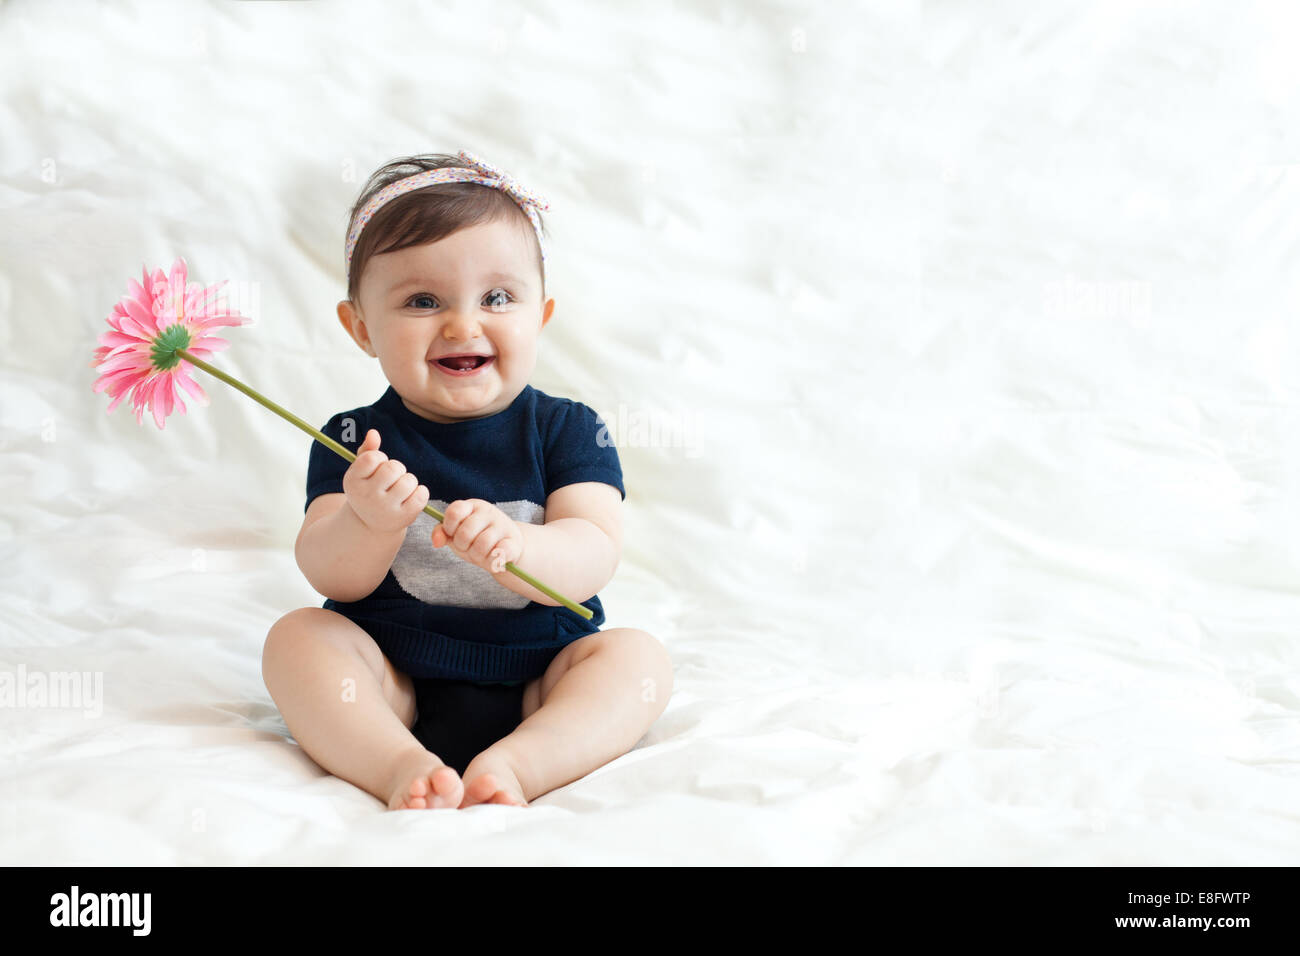 Smiling baby girl holding a plastic flower Stock Photo